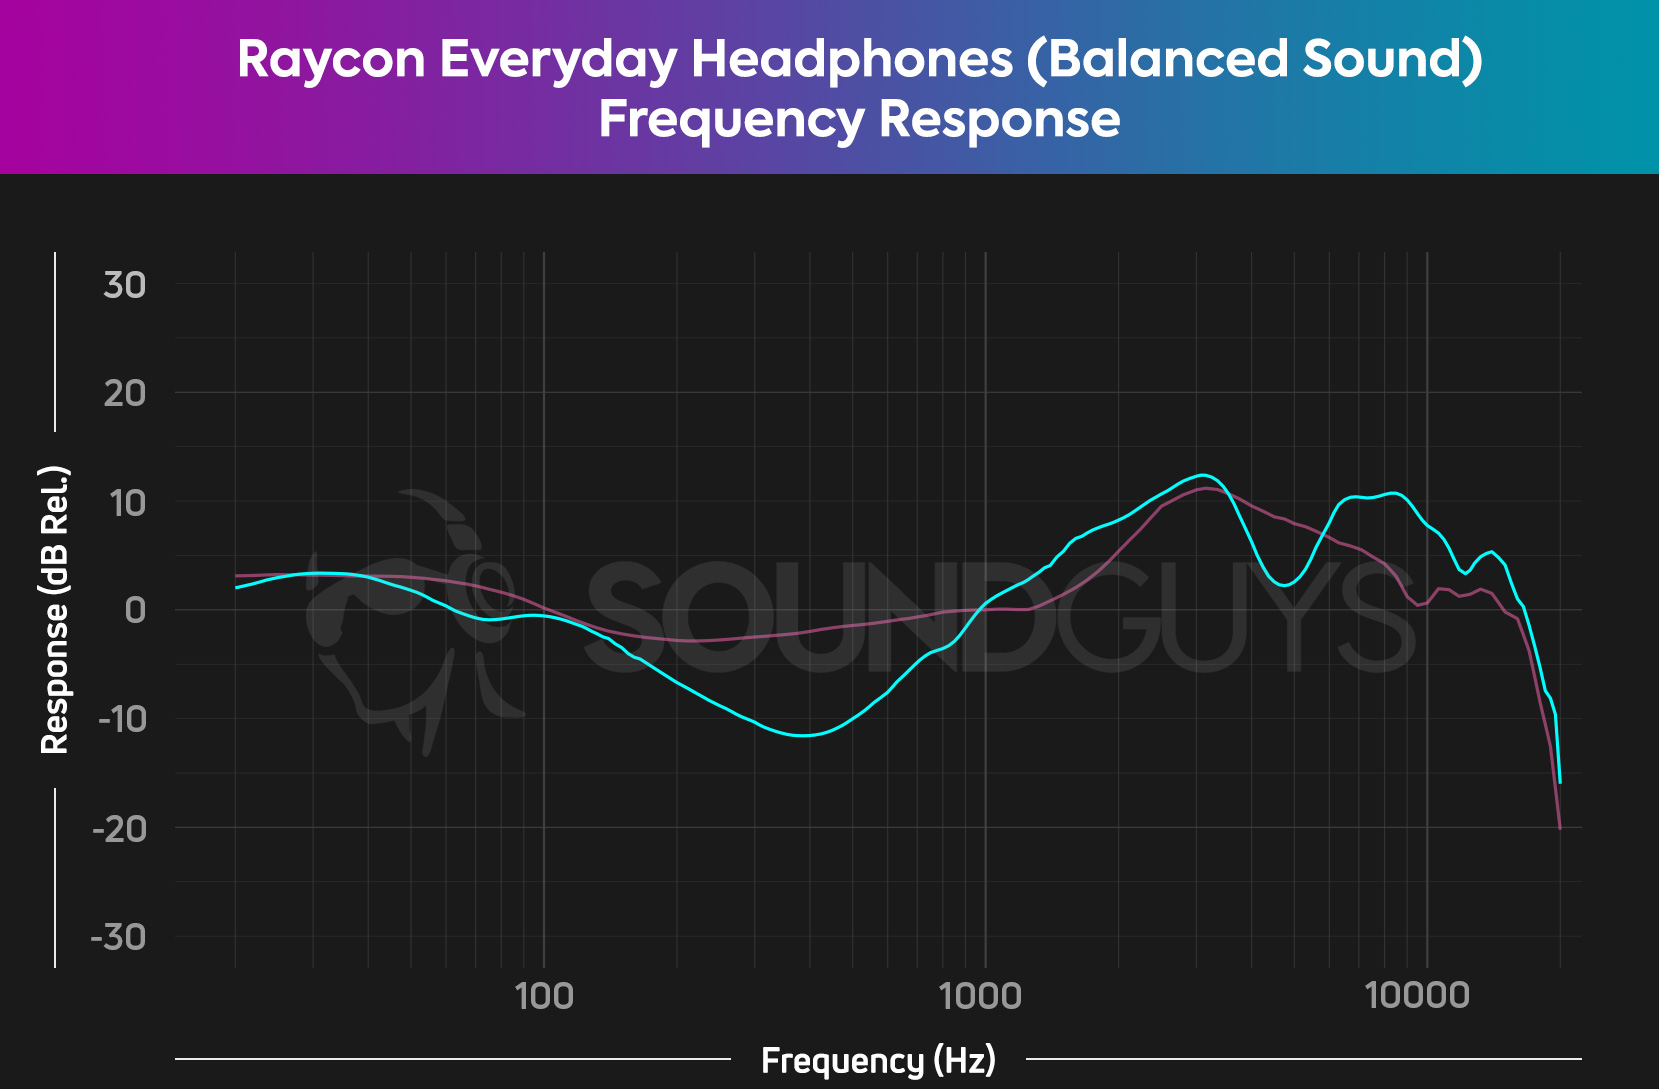 The frequency response chart for the Raycon Everyday Headphones, which shows de-emphasized mids and emphasized treble notes.